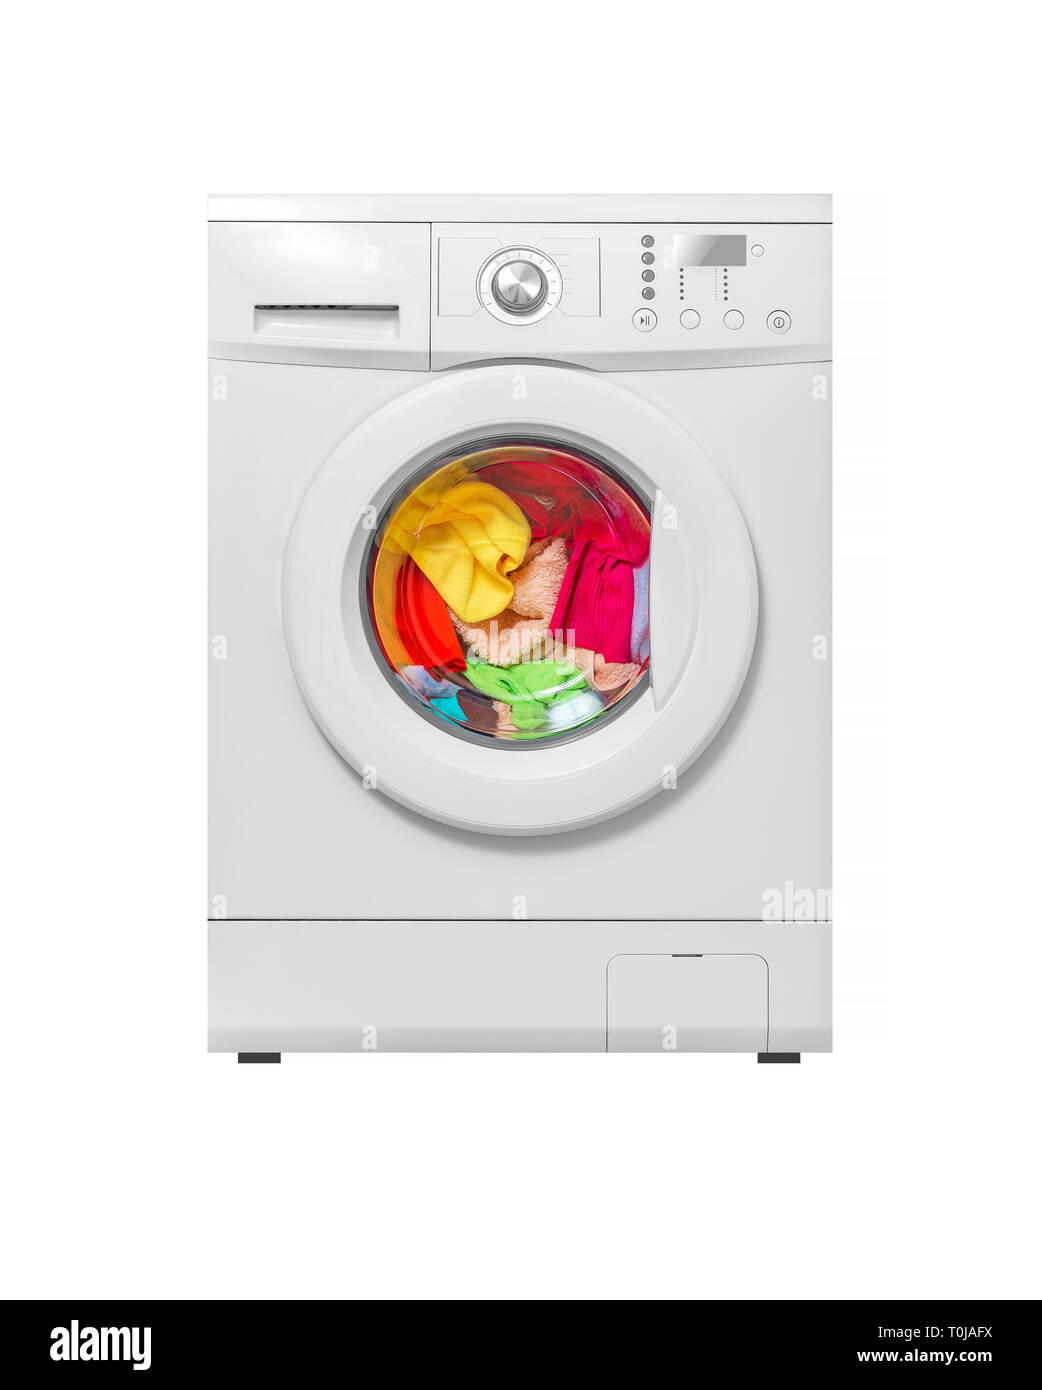 Washing machine with color laundry loaded for washing. Stock Photo